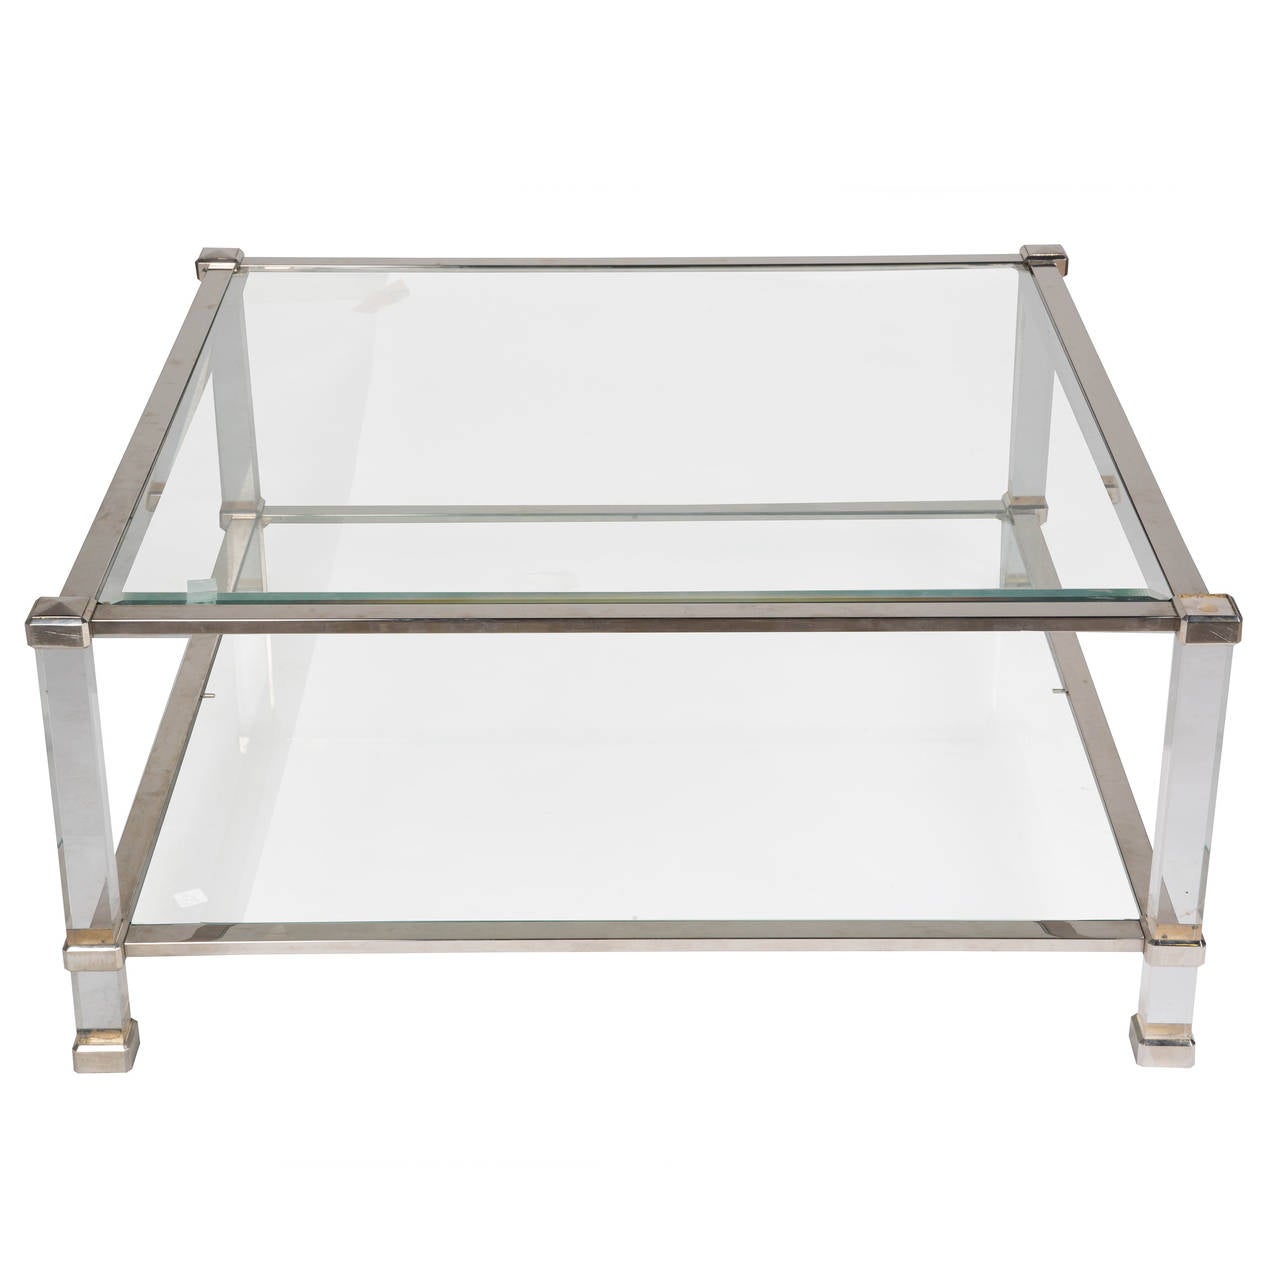 1970s French chrome, glass and lucite coffee table.